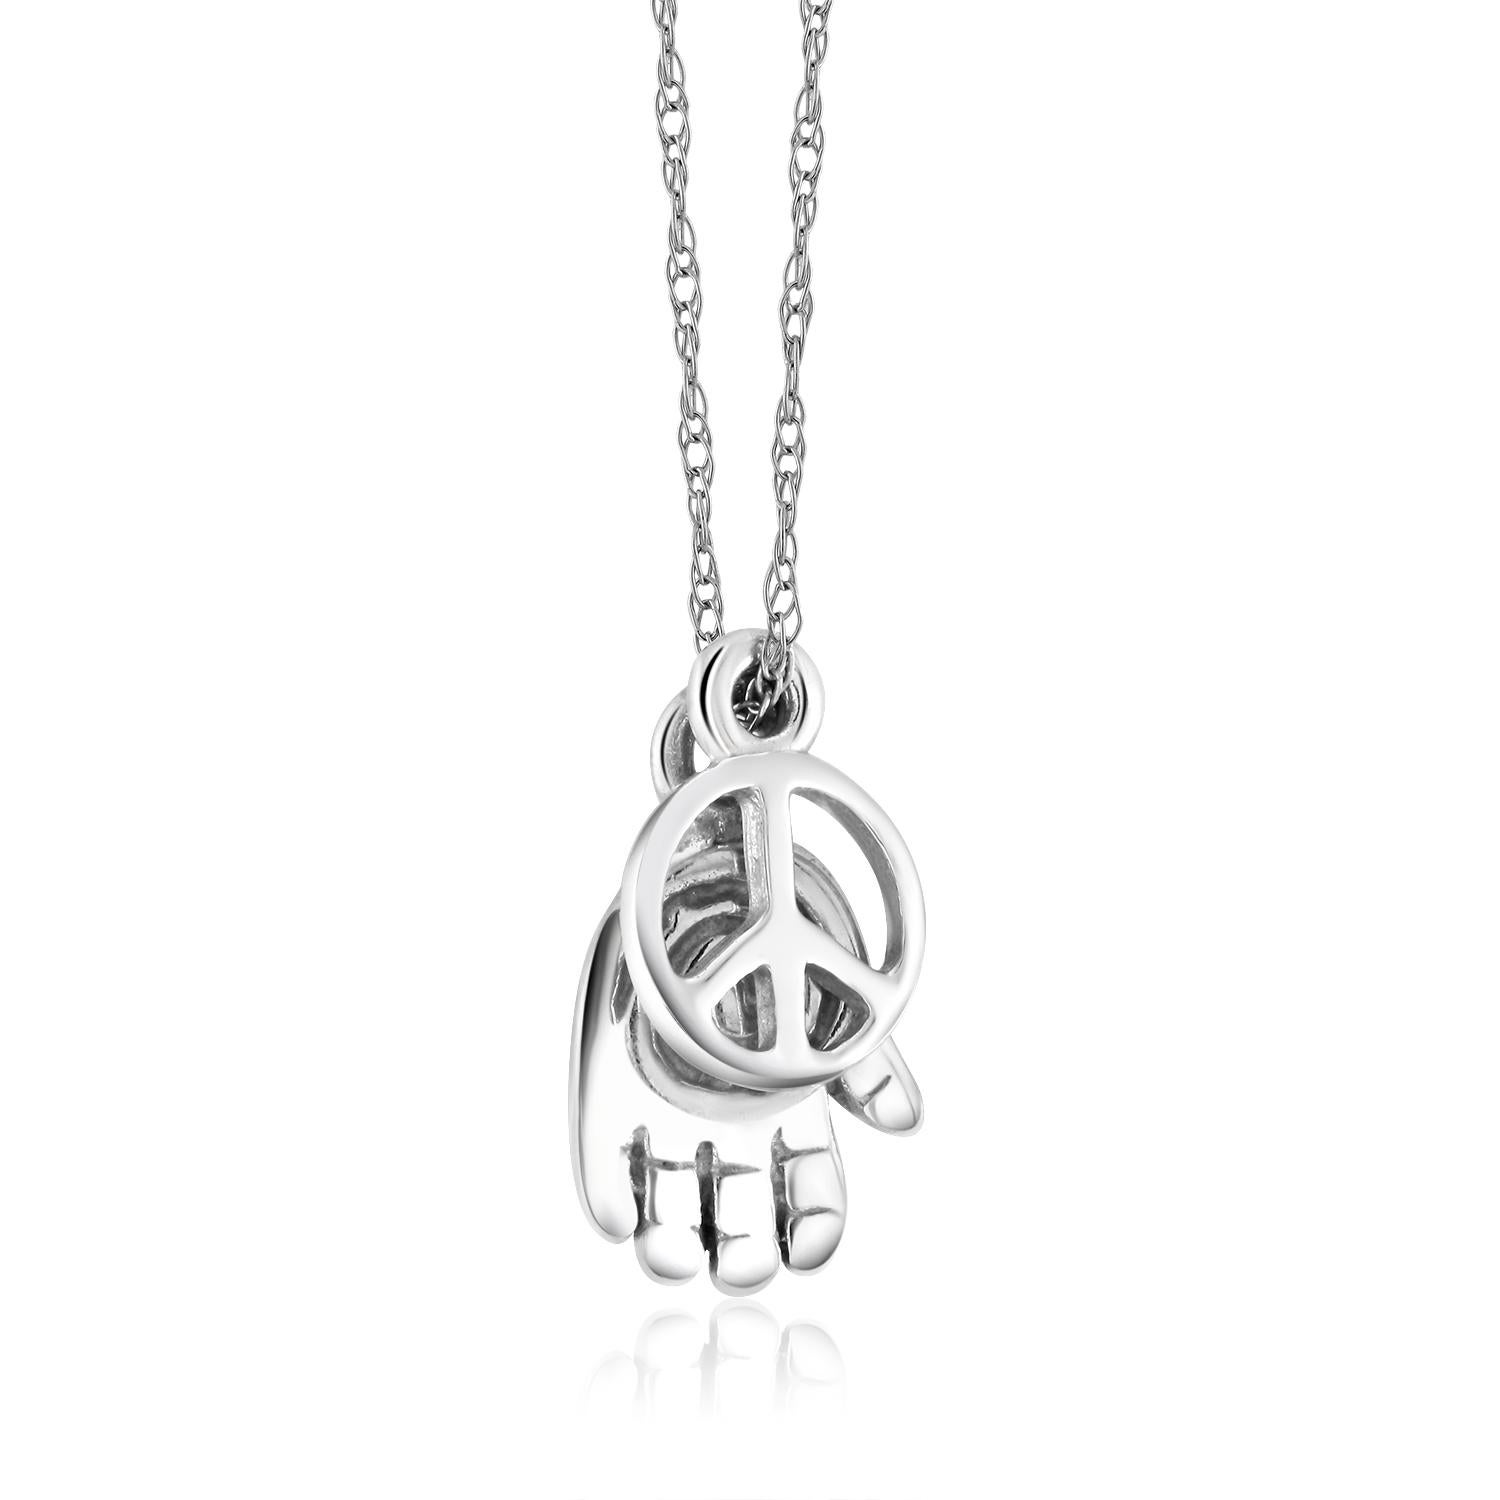 Women's or Men's White Gold Luck and Peace Two Symbol Charms Diamond Pendant Necklace